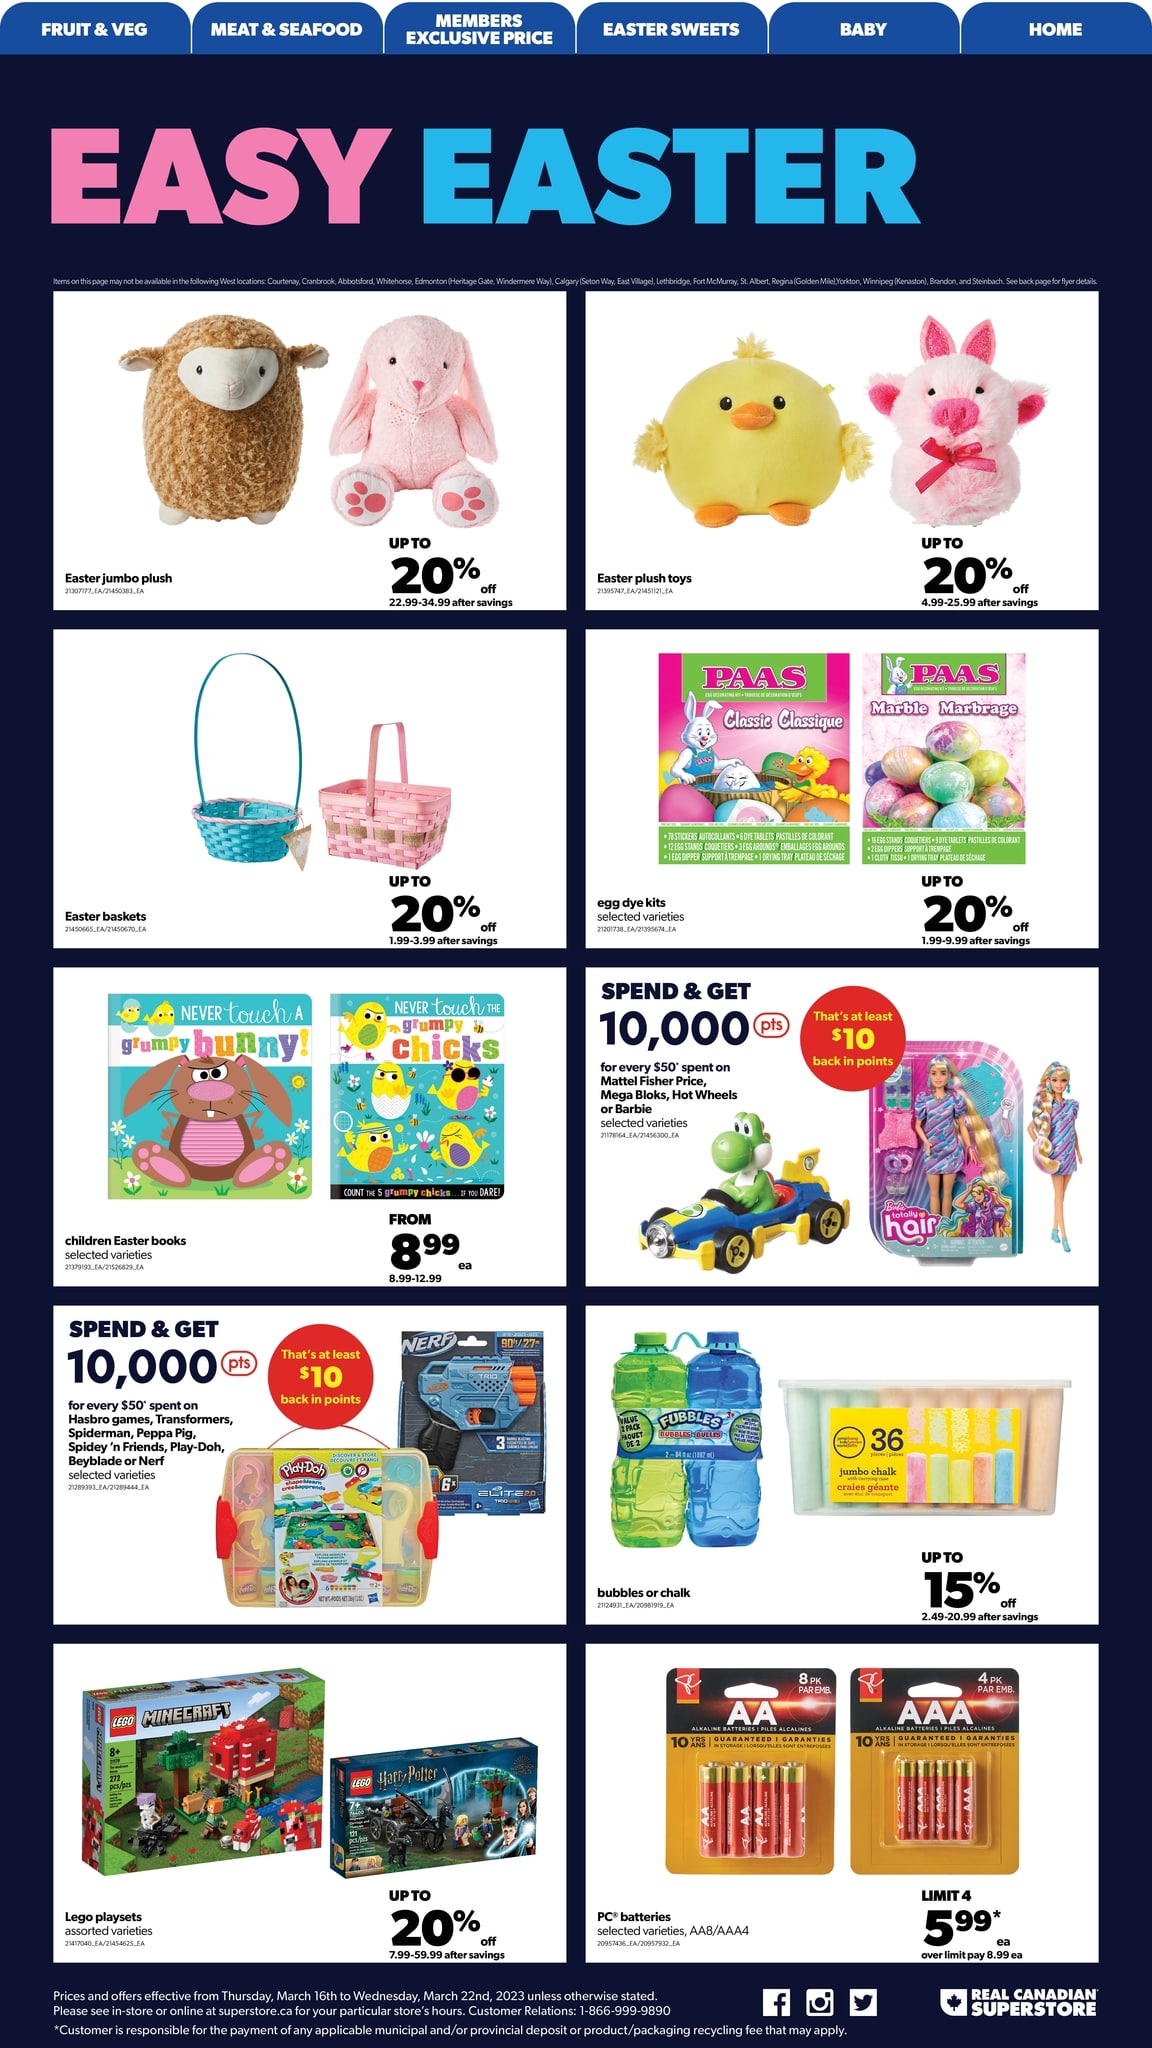 Real Canadian Superstore - Western Canada - Weekly Flyer Specials - Page 19